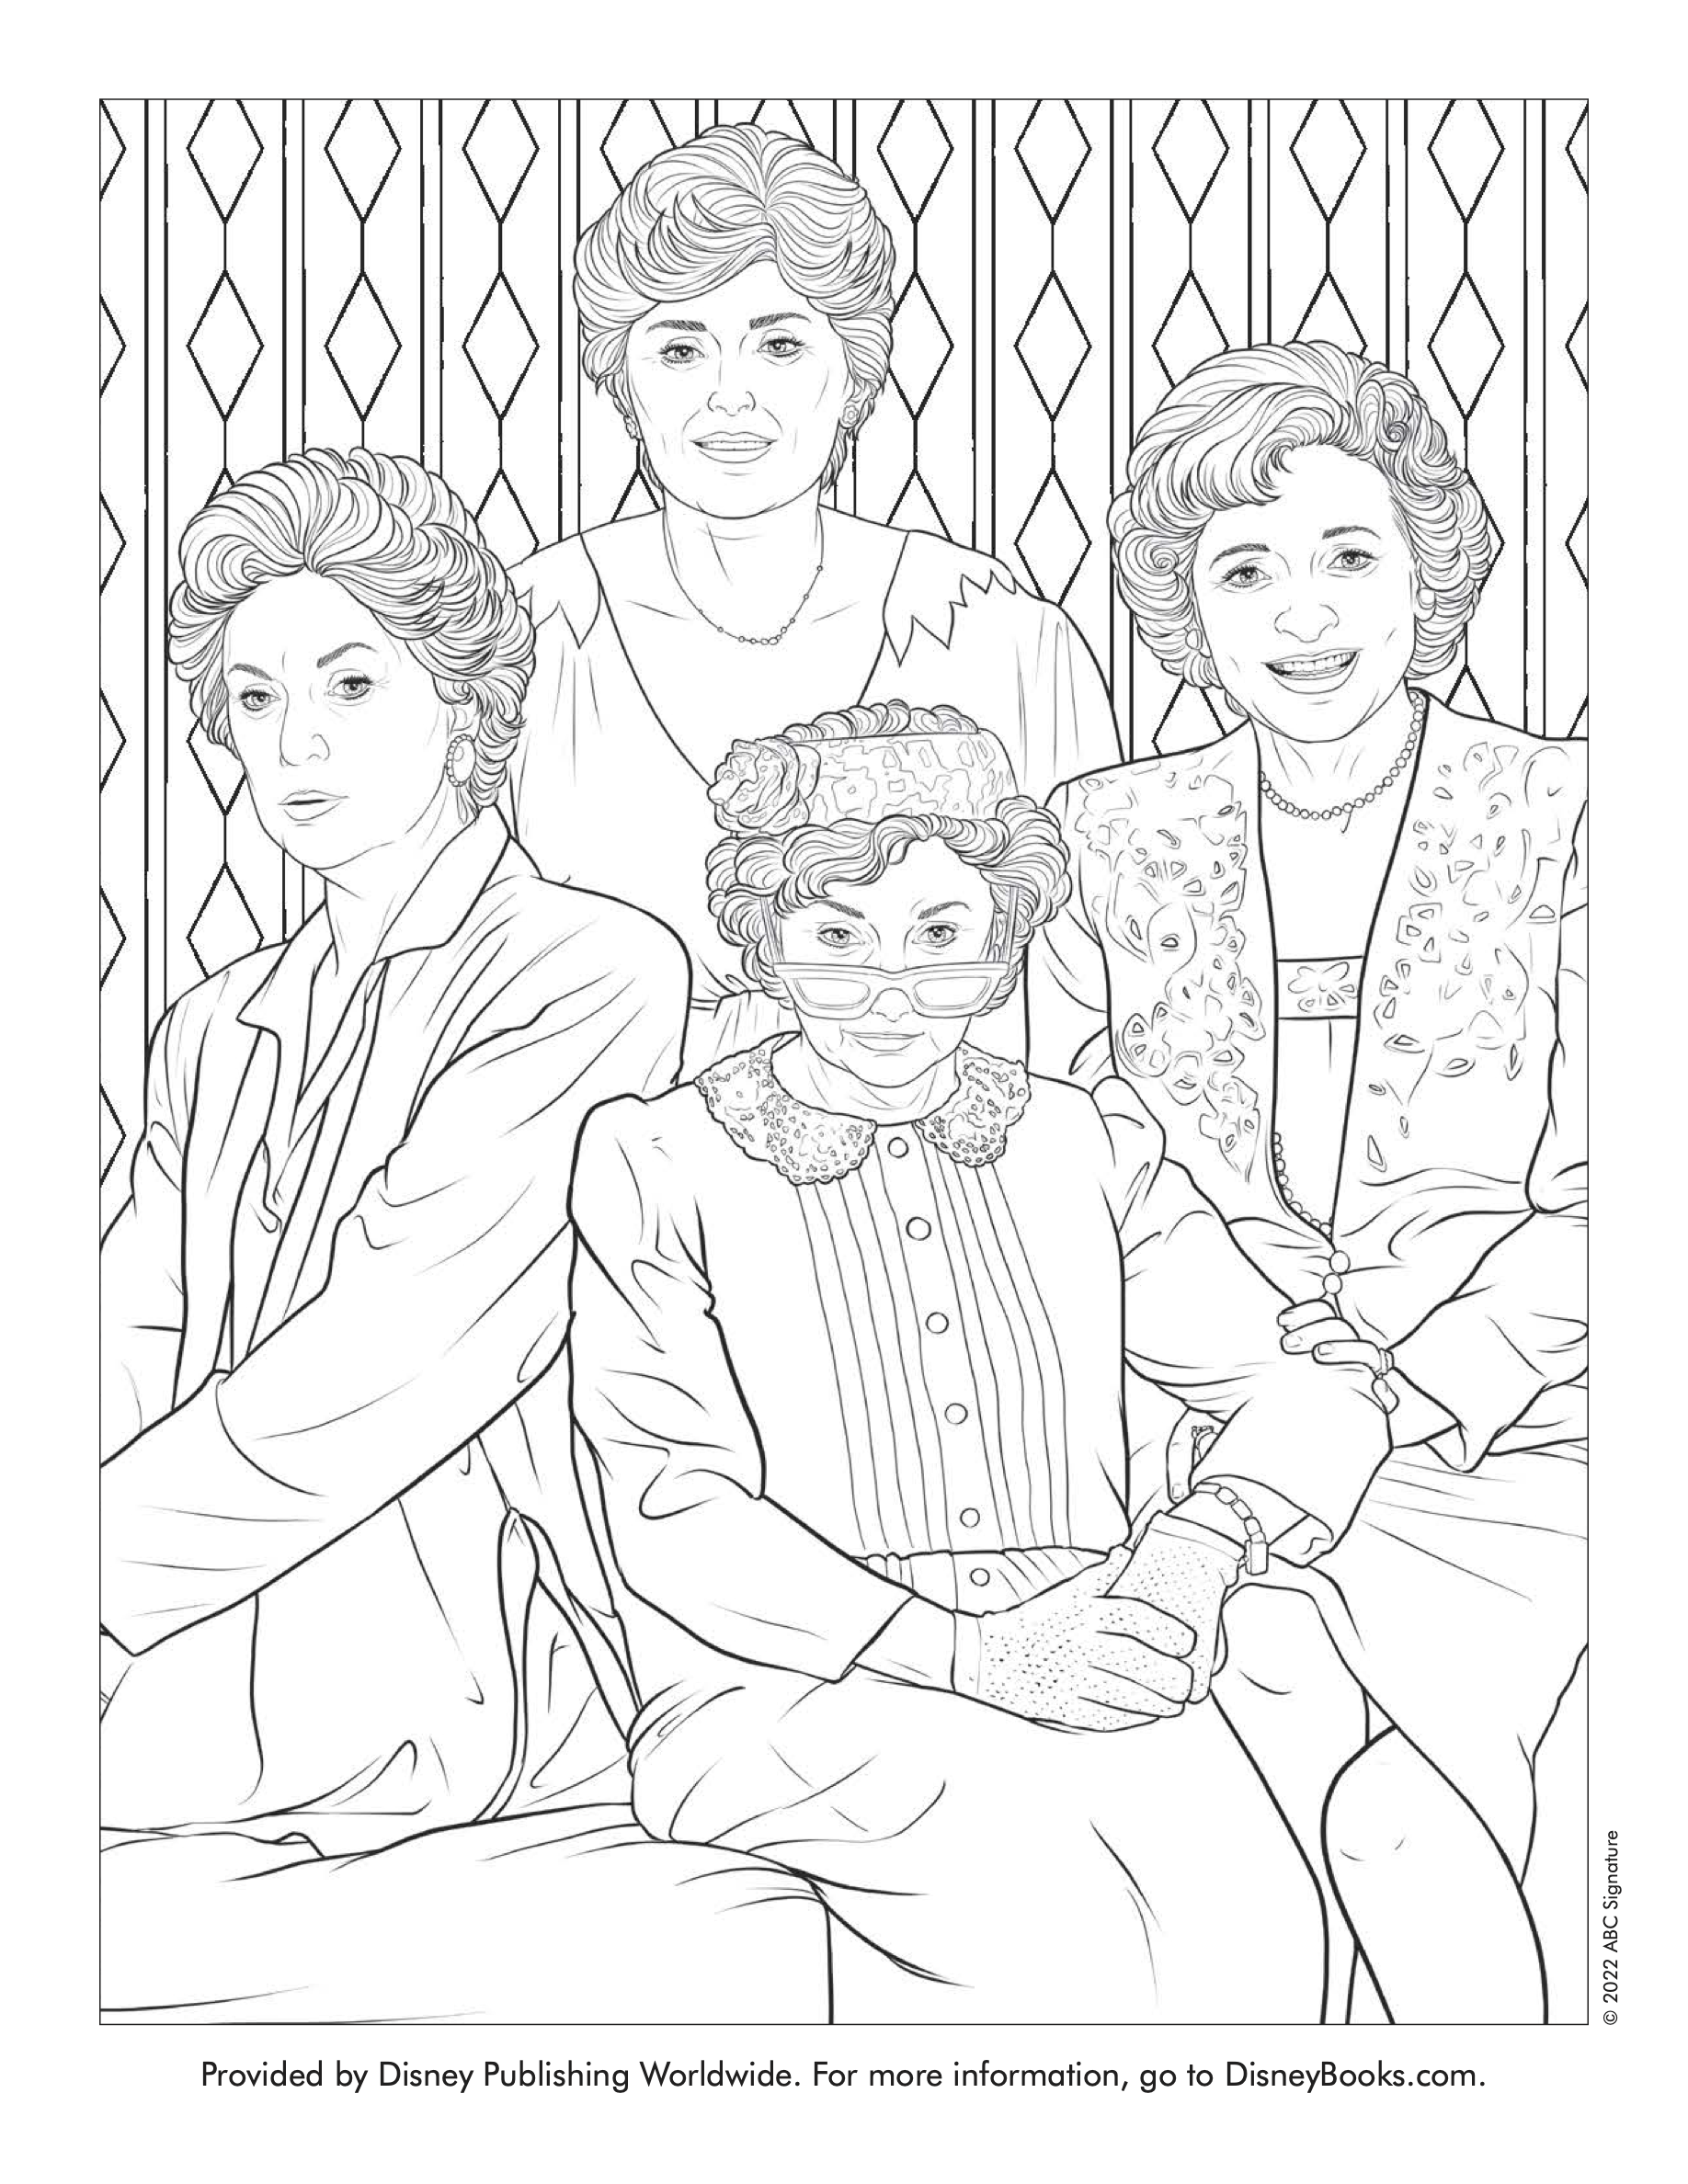 Official Golden Girls coloring pages from Disney Movie Insiders :  r/theGoldenGirls